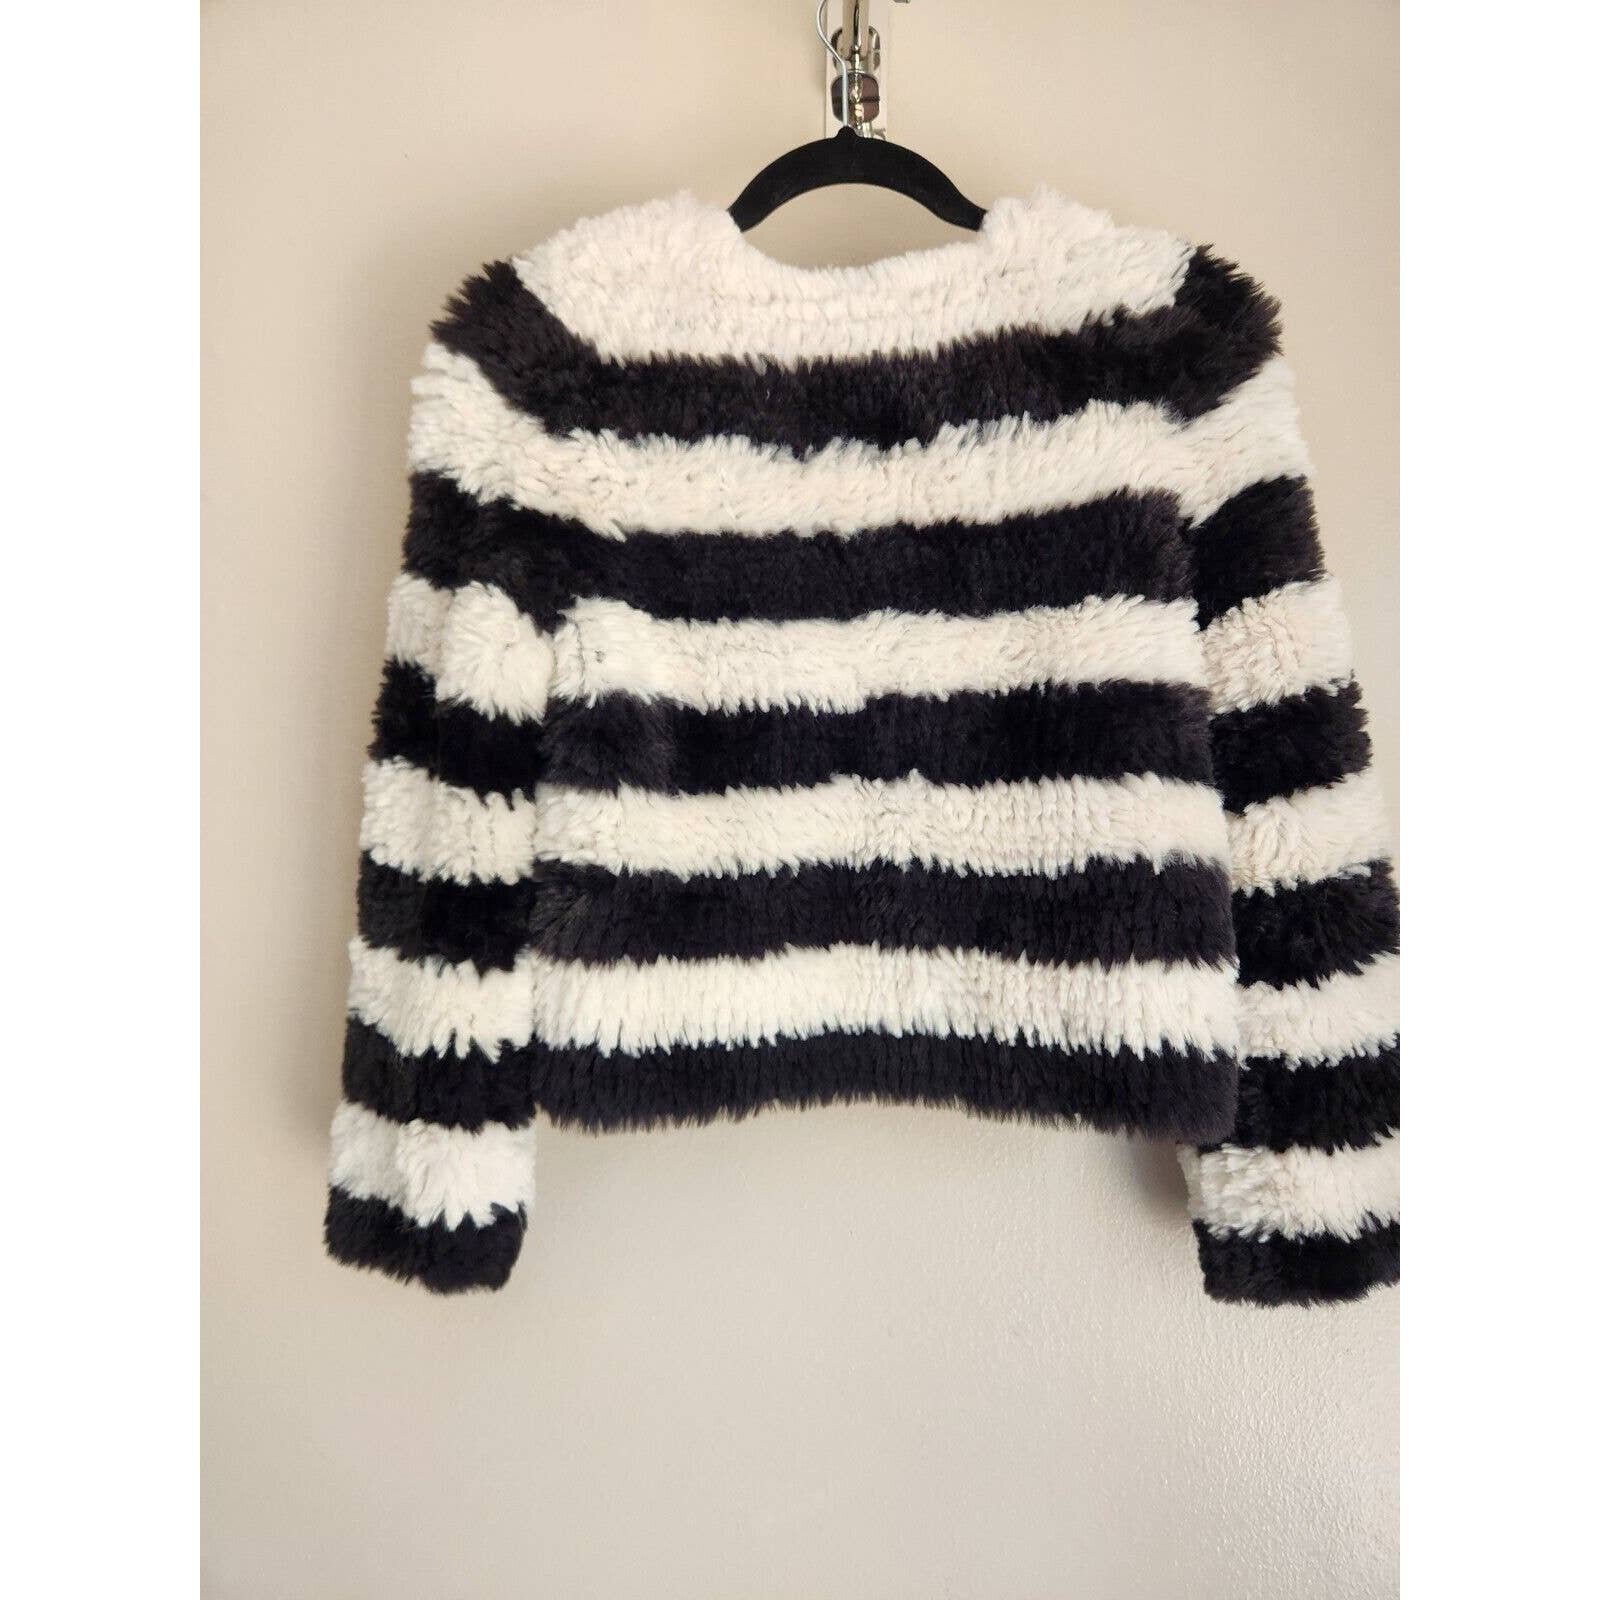 Latest  NWOT ALICE + OLIVIA Fawn Striped Faux Fur jacket Size S Black/White Runs Small IVIAwgokf Outlet Store